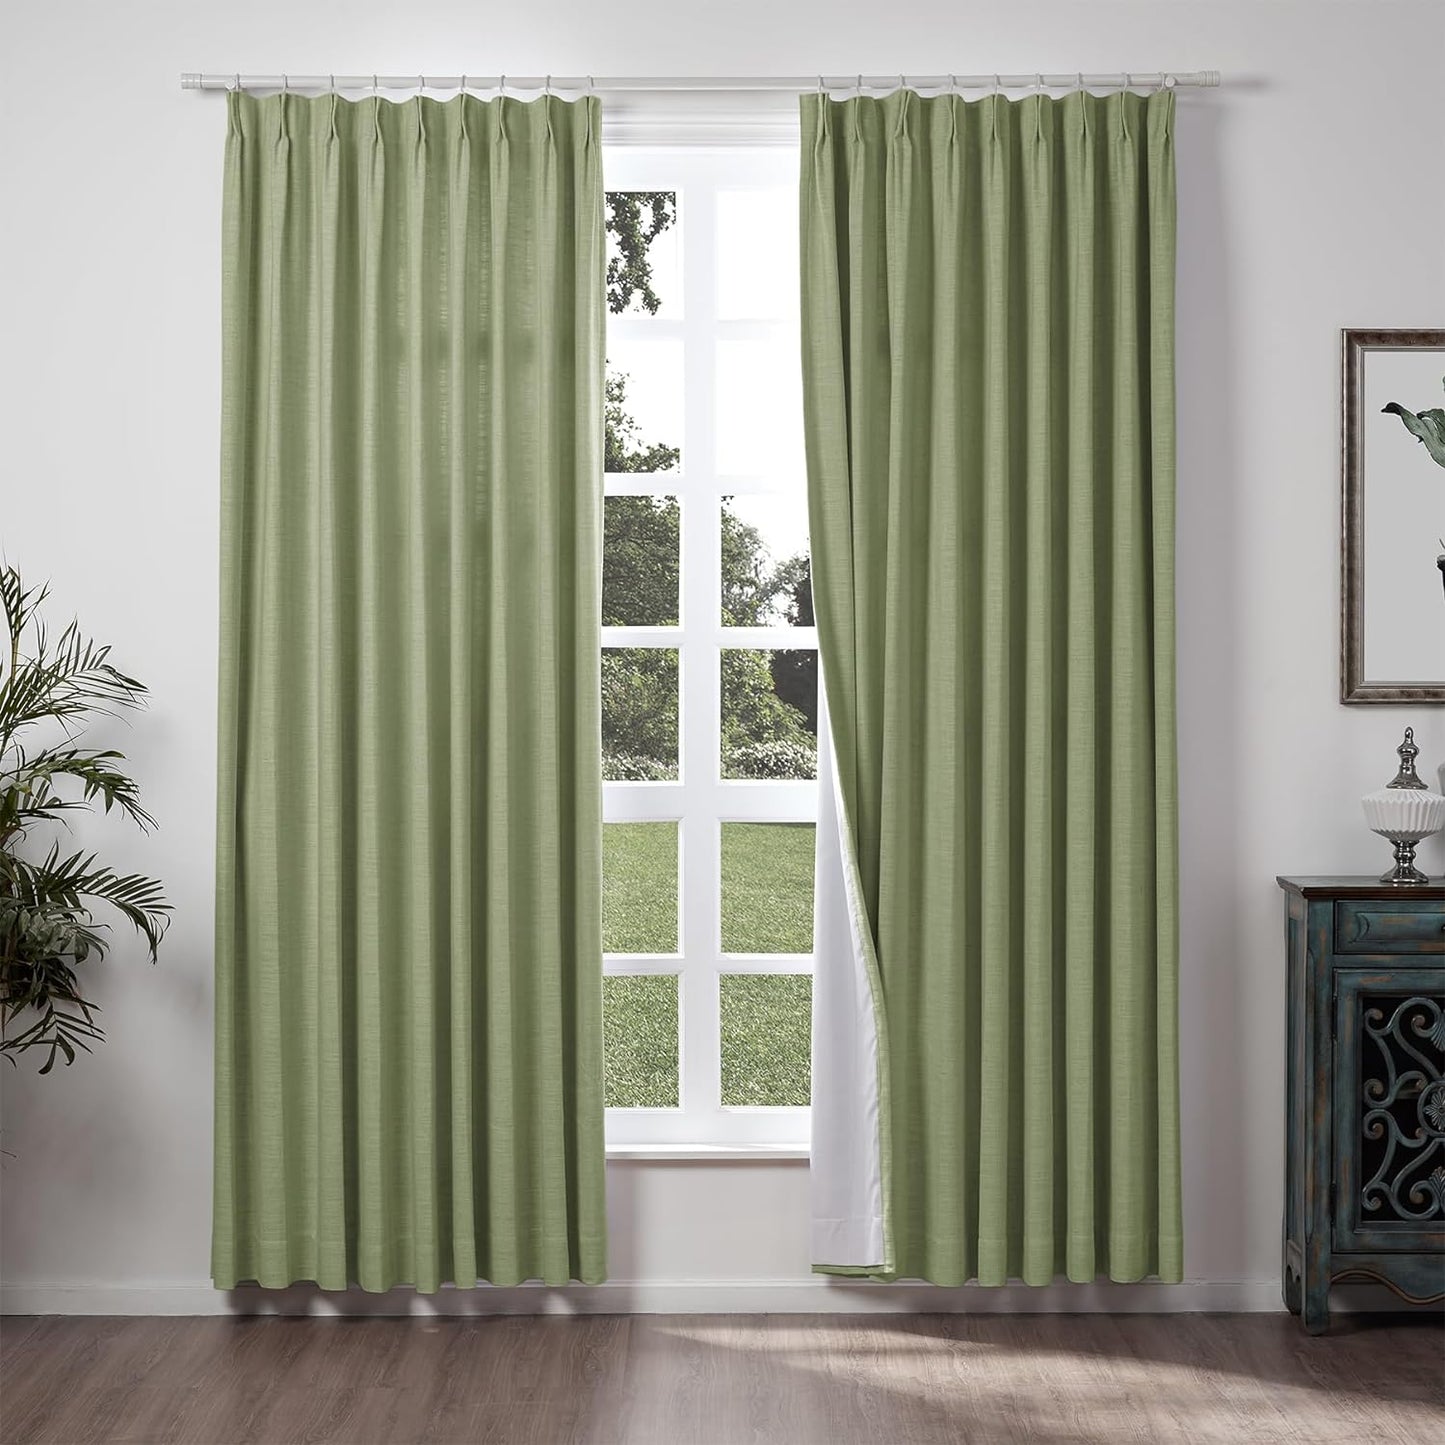 Chadmade 50" W X 84" L Polyester Linen Drape with Blackout Lining Pinch Pleat Curtain for Sliding Door Patio Door Living Room Bedroom, (1 Panel) Beige White Liz Collection  ChadMade Jade Green (29) 100Wx84L 